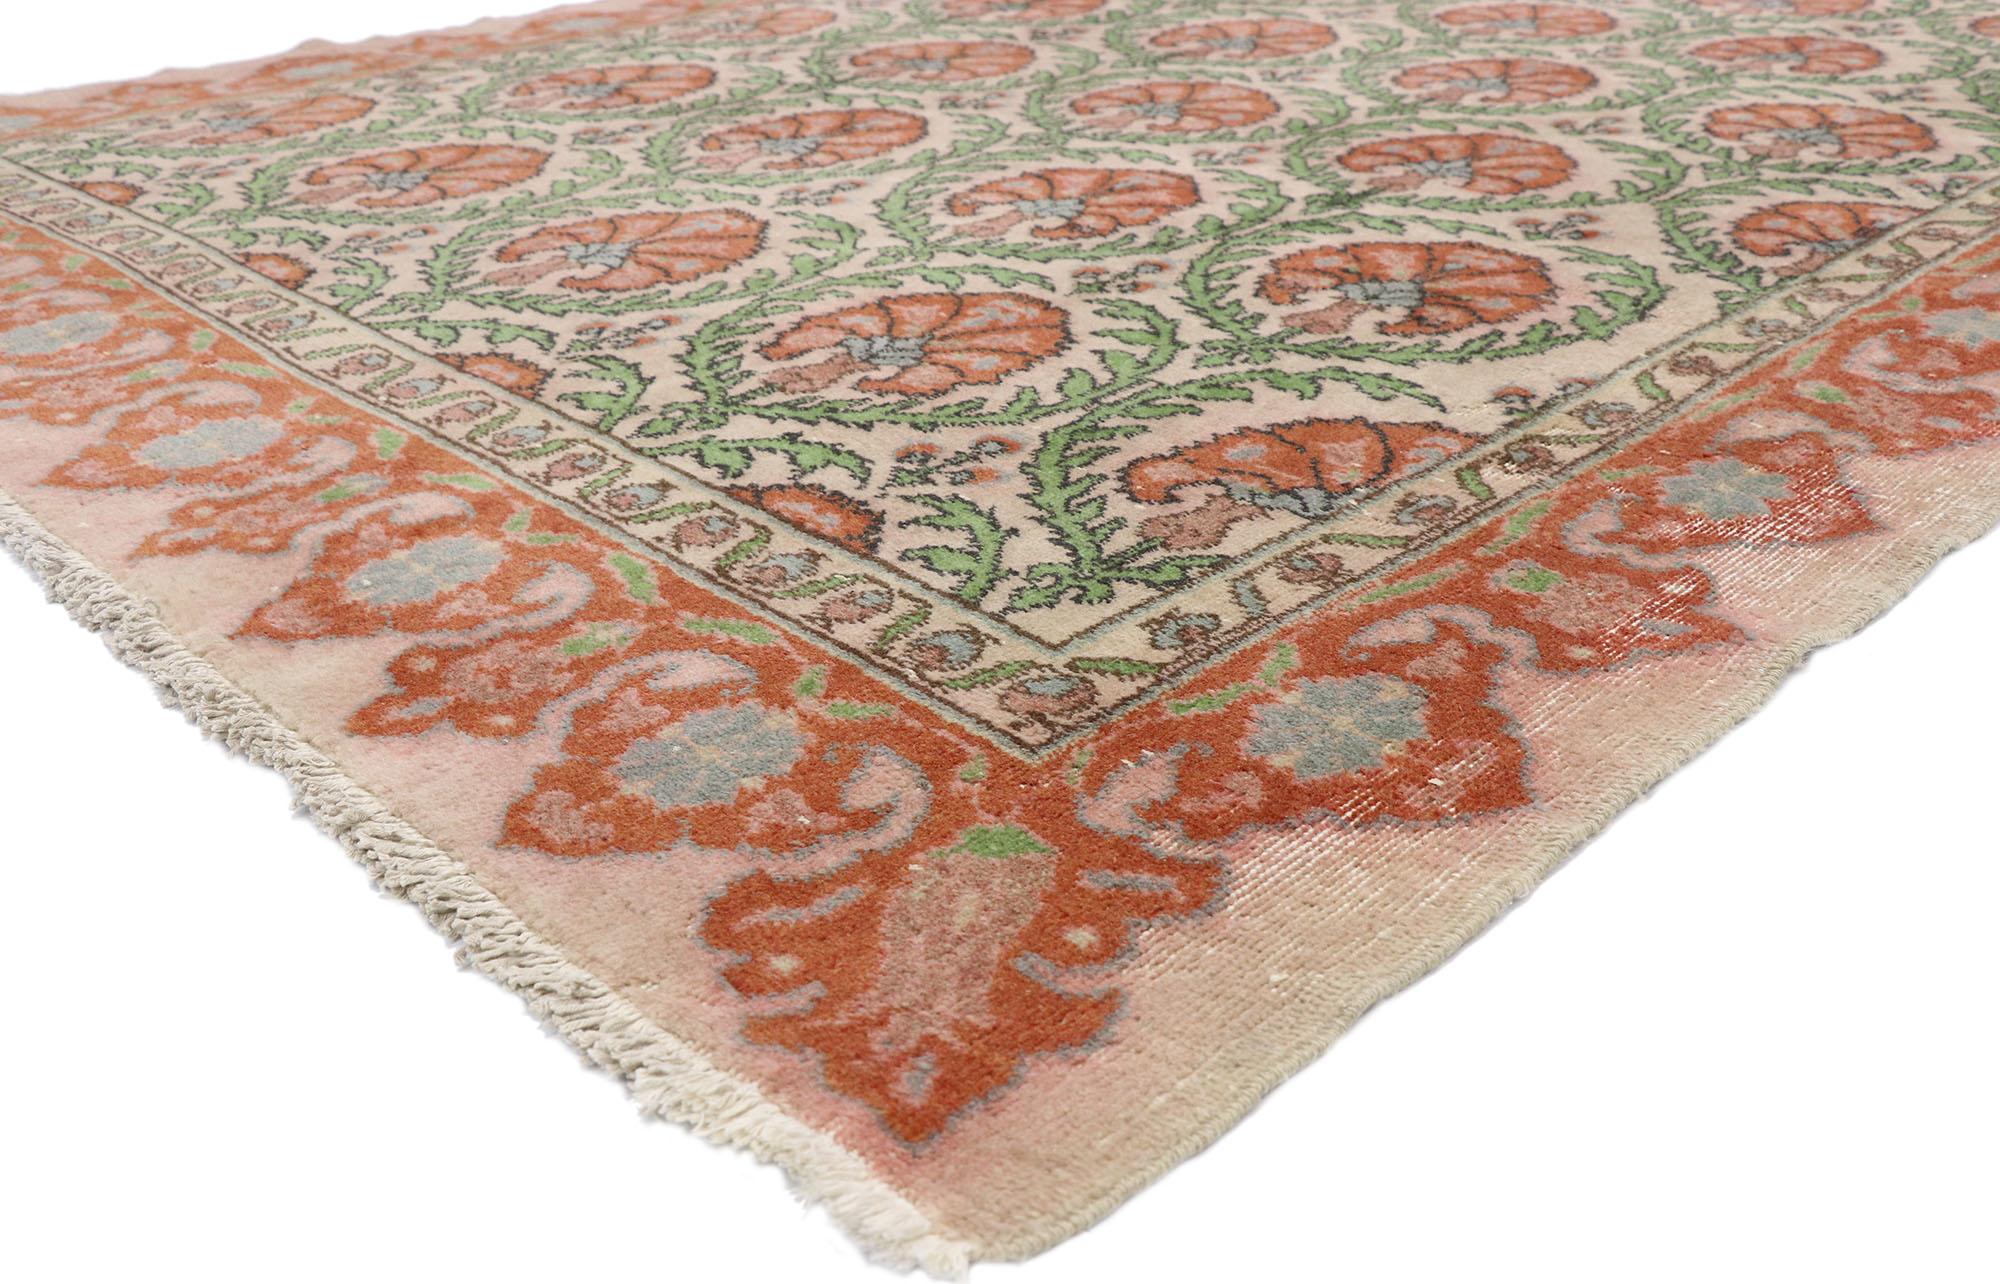 52577 Distressed Vintage Turkish Sivas Rug with Arts & Crafts William Morris Style 06'08 x 10'08. Reminisce of 19th century French designs and decorative elegance, this hand knotted wool distressed vintage Turkish Sivas rug beautifully embodies Arts